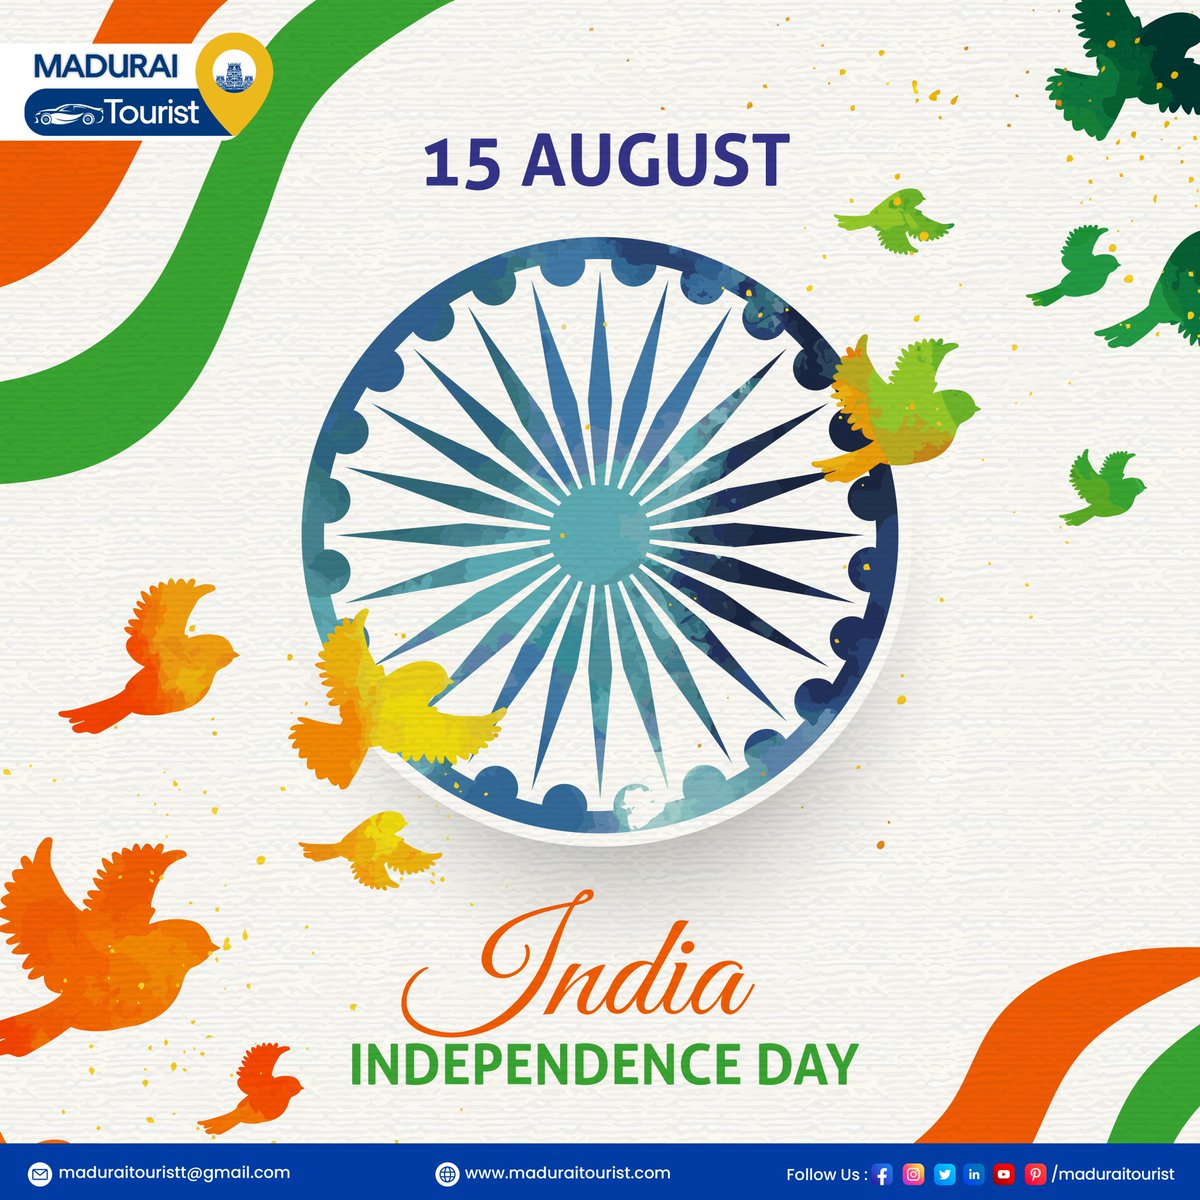 Wishing you a joyous and proud Independence Day! May our nation continue to prosper and shine. 🇮🇳 #IndependenceDay2023 #ProudNation #maduraitourist #letsconnect #happyindependenceday2023 #independenceday2023 #india #august #happy #freedom #love #indian #jaihind